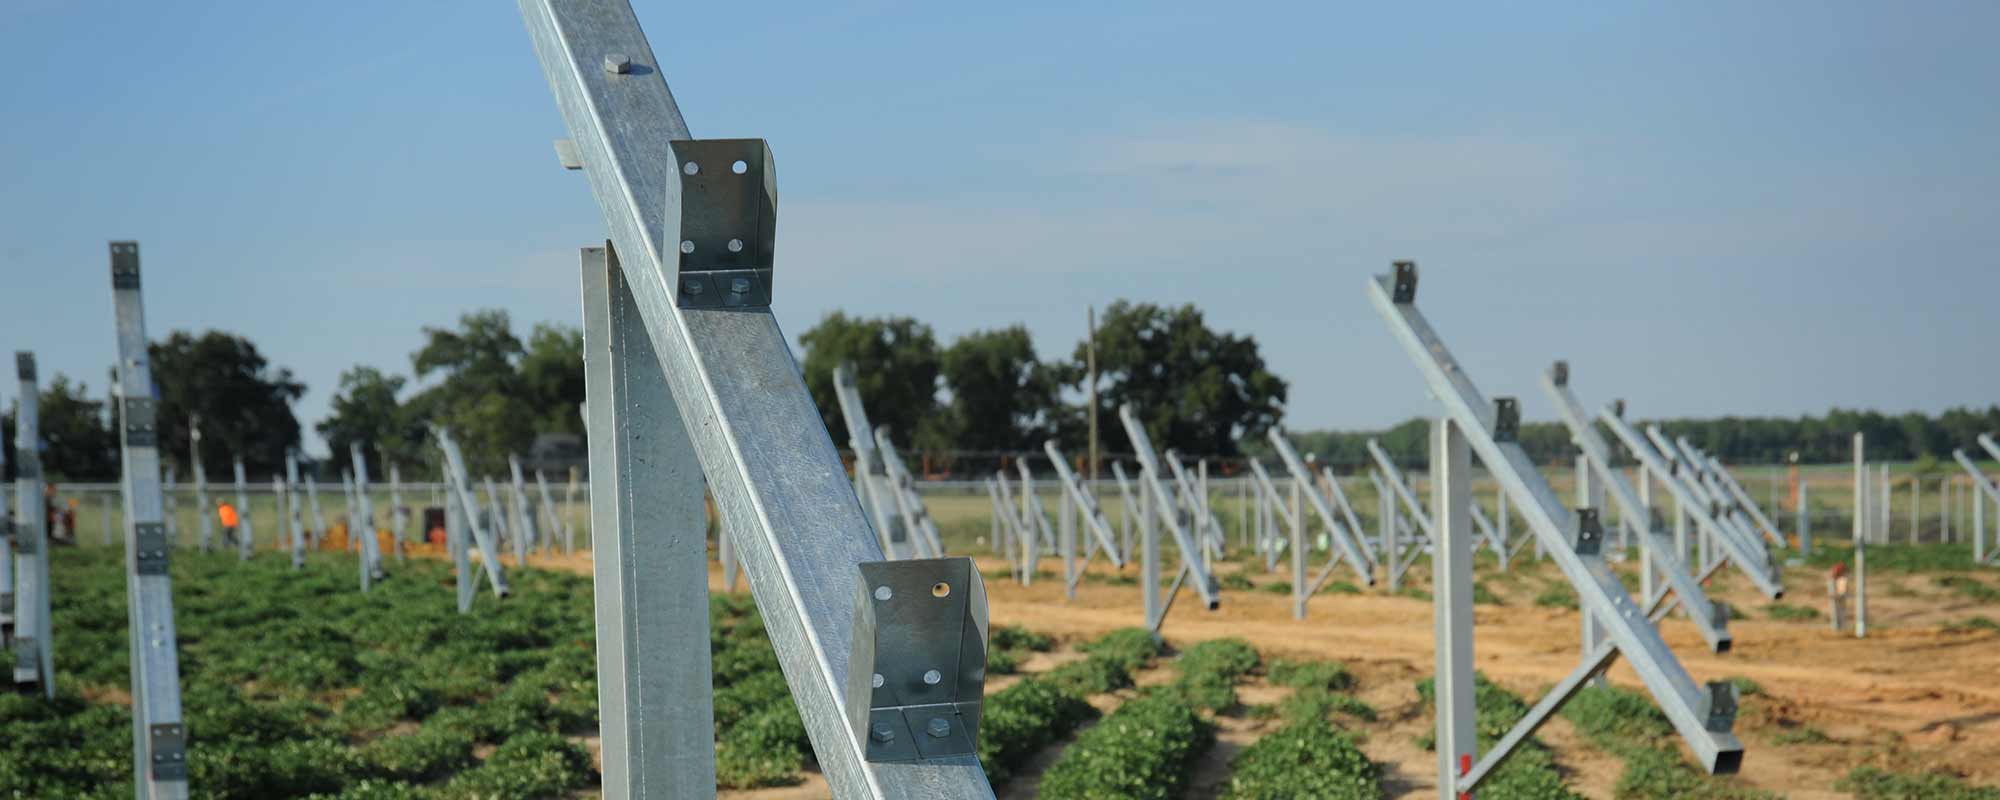 Brilliant Rack - Solutions for Ground Mounted Solar Projects